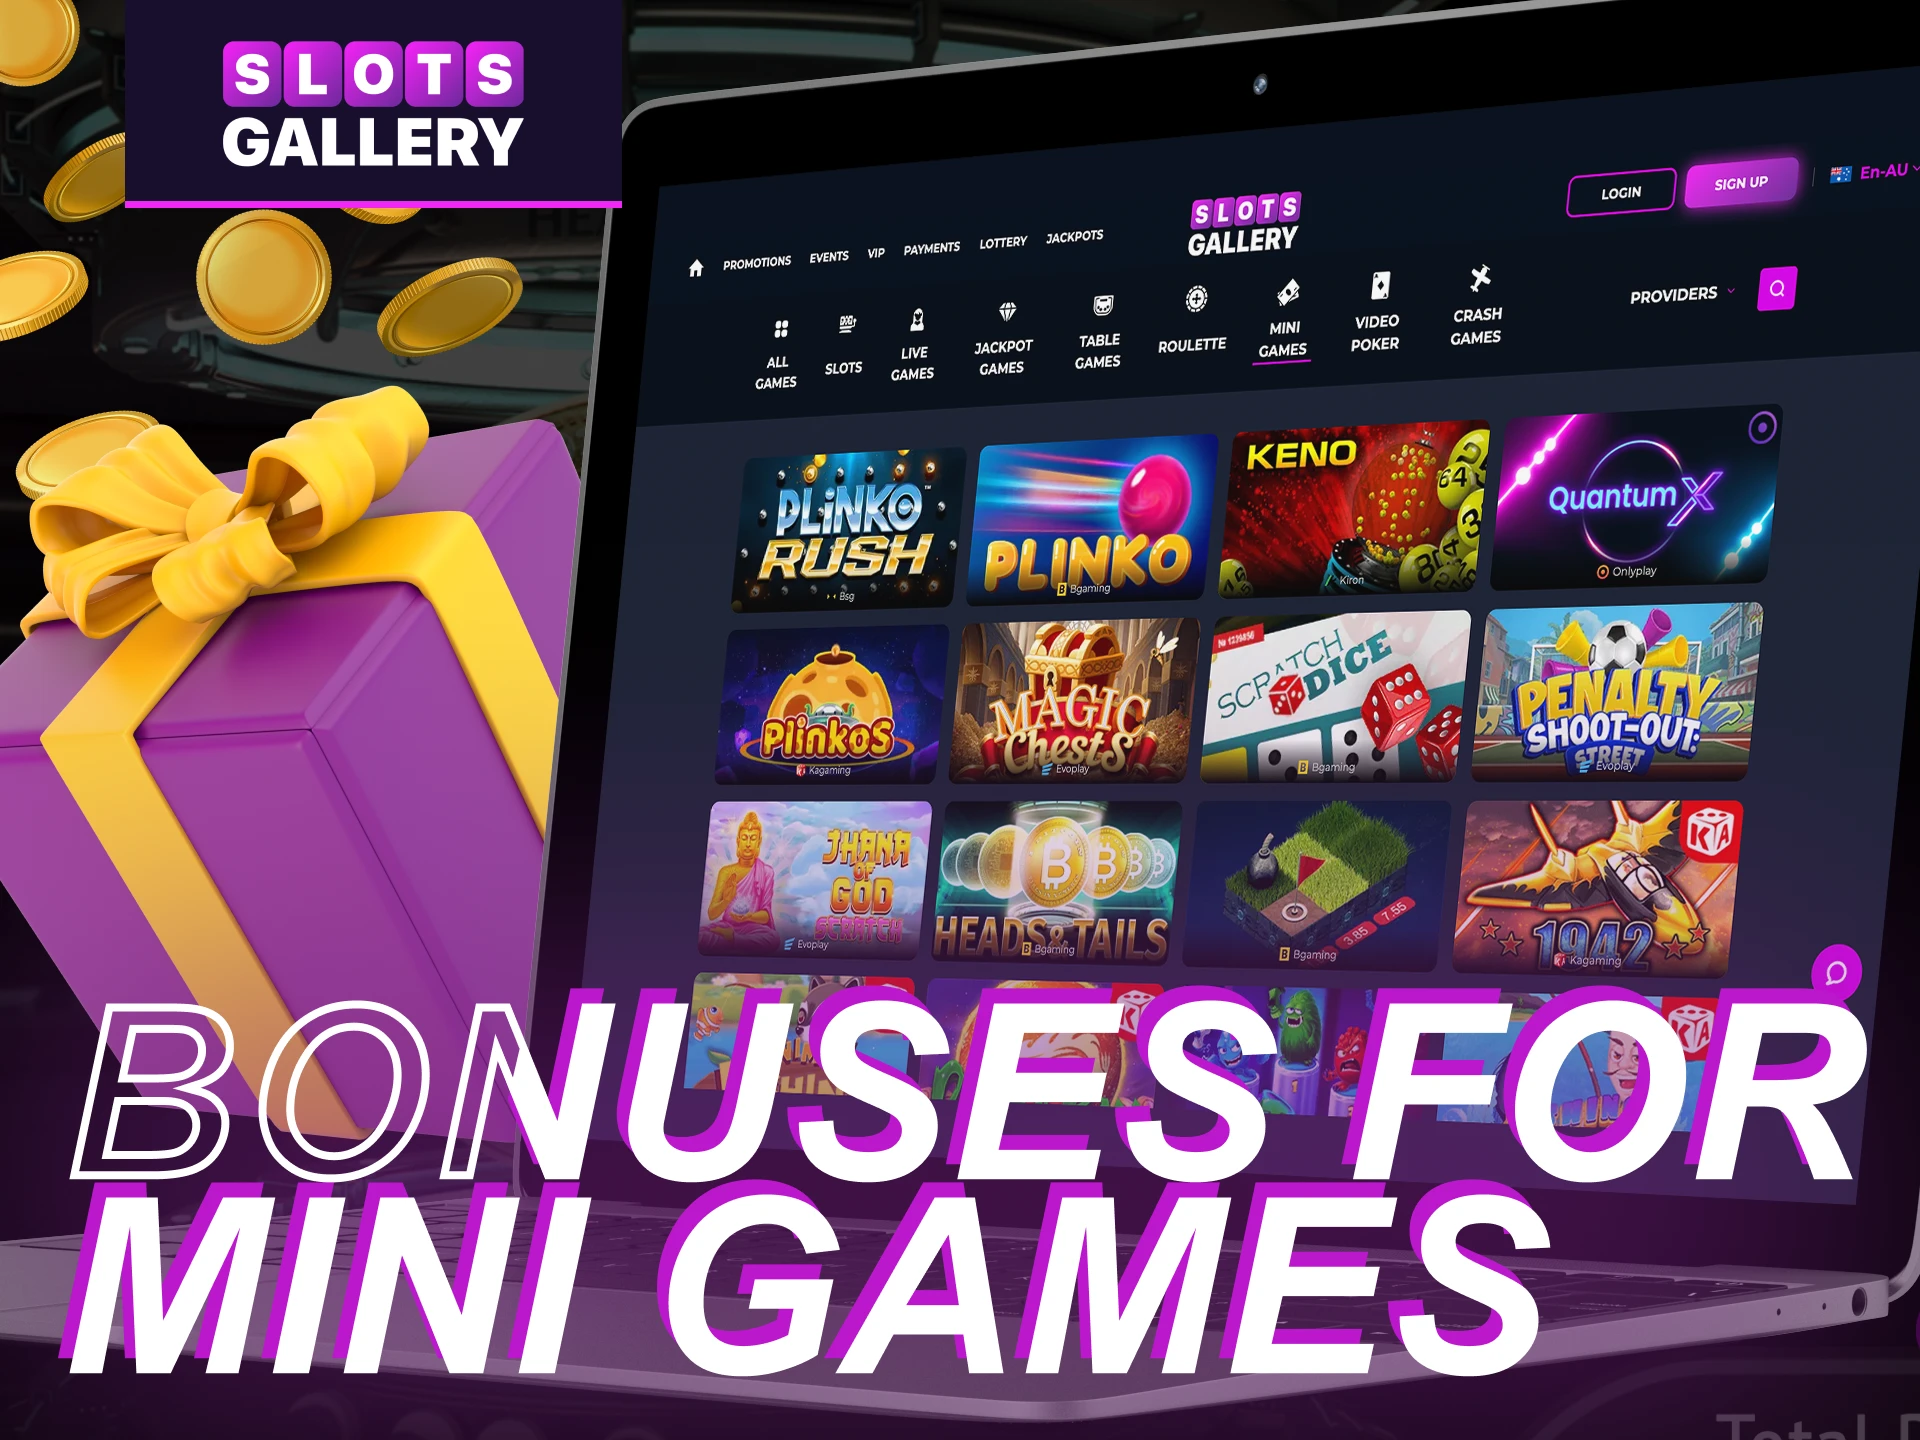 Are there bonuses for mini games at the Slots Gallery online casino.